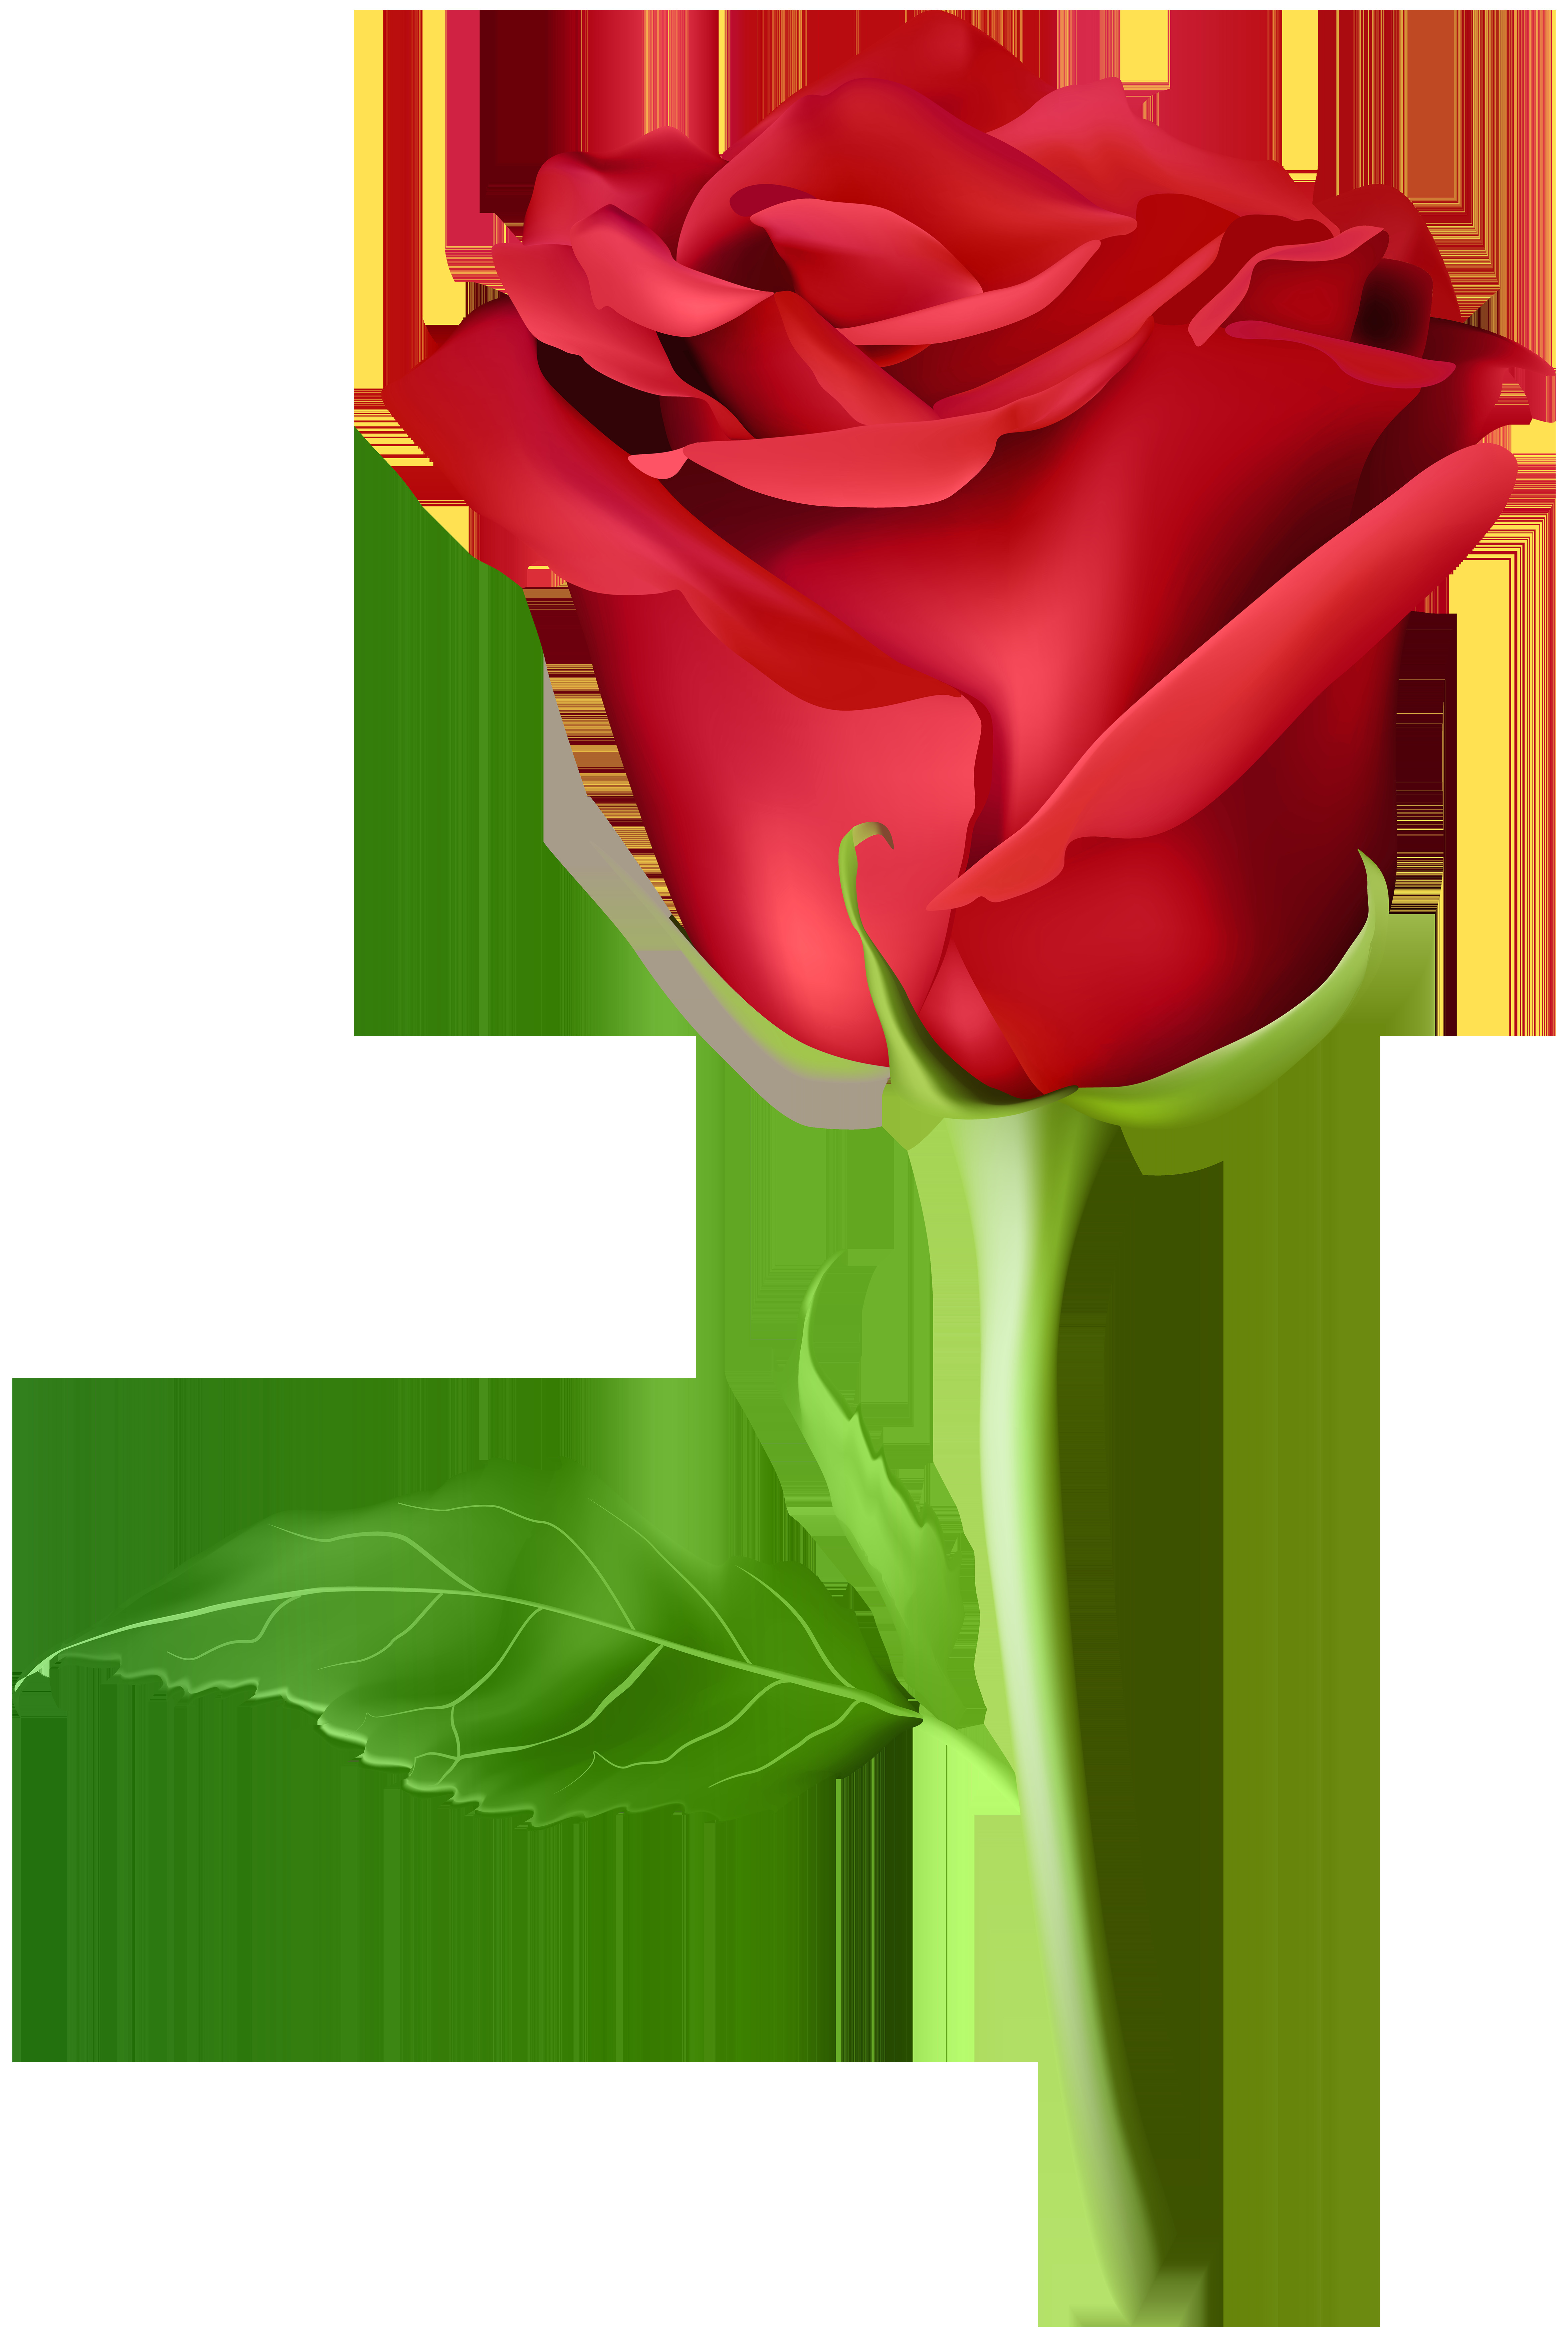 Drawing A Red Rose Pin by Kittu Raja On Nk Red Roses Rose Flower Pictures Rose